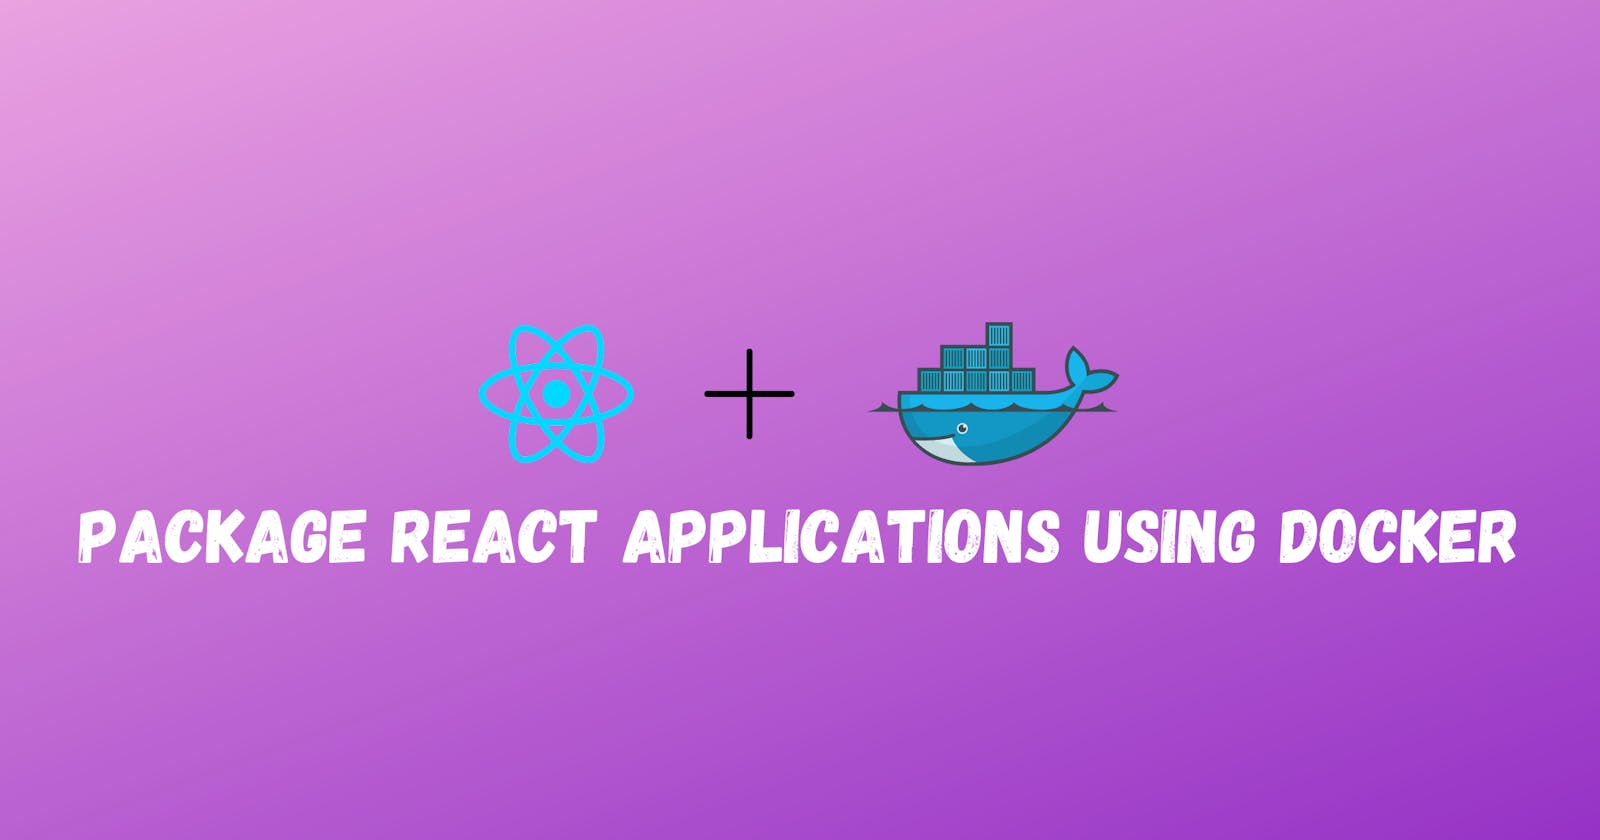 Package React Applications using Docker